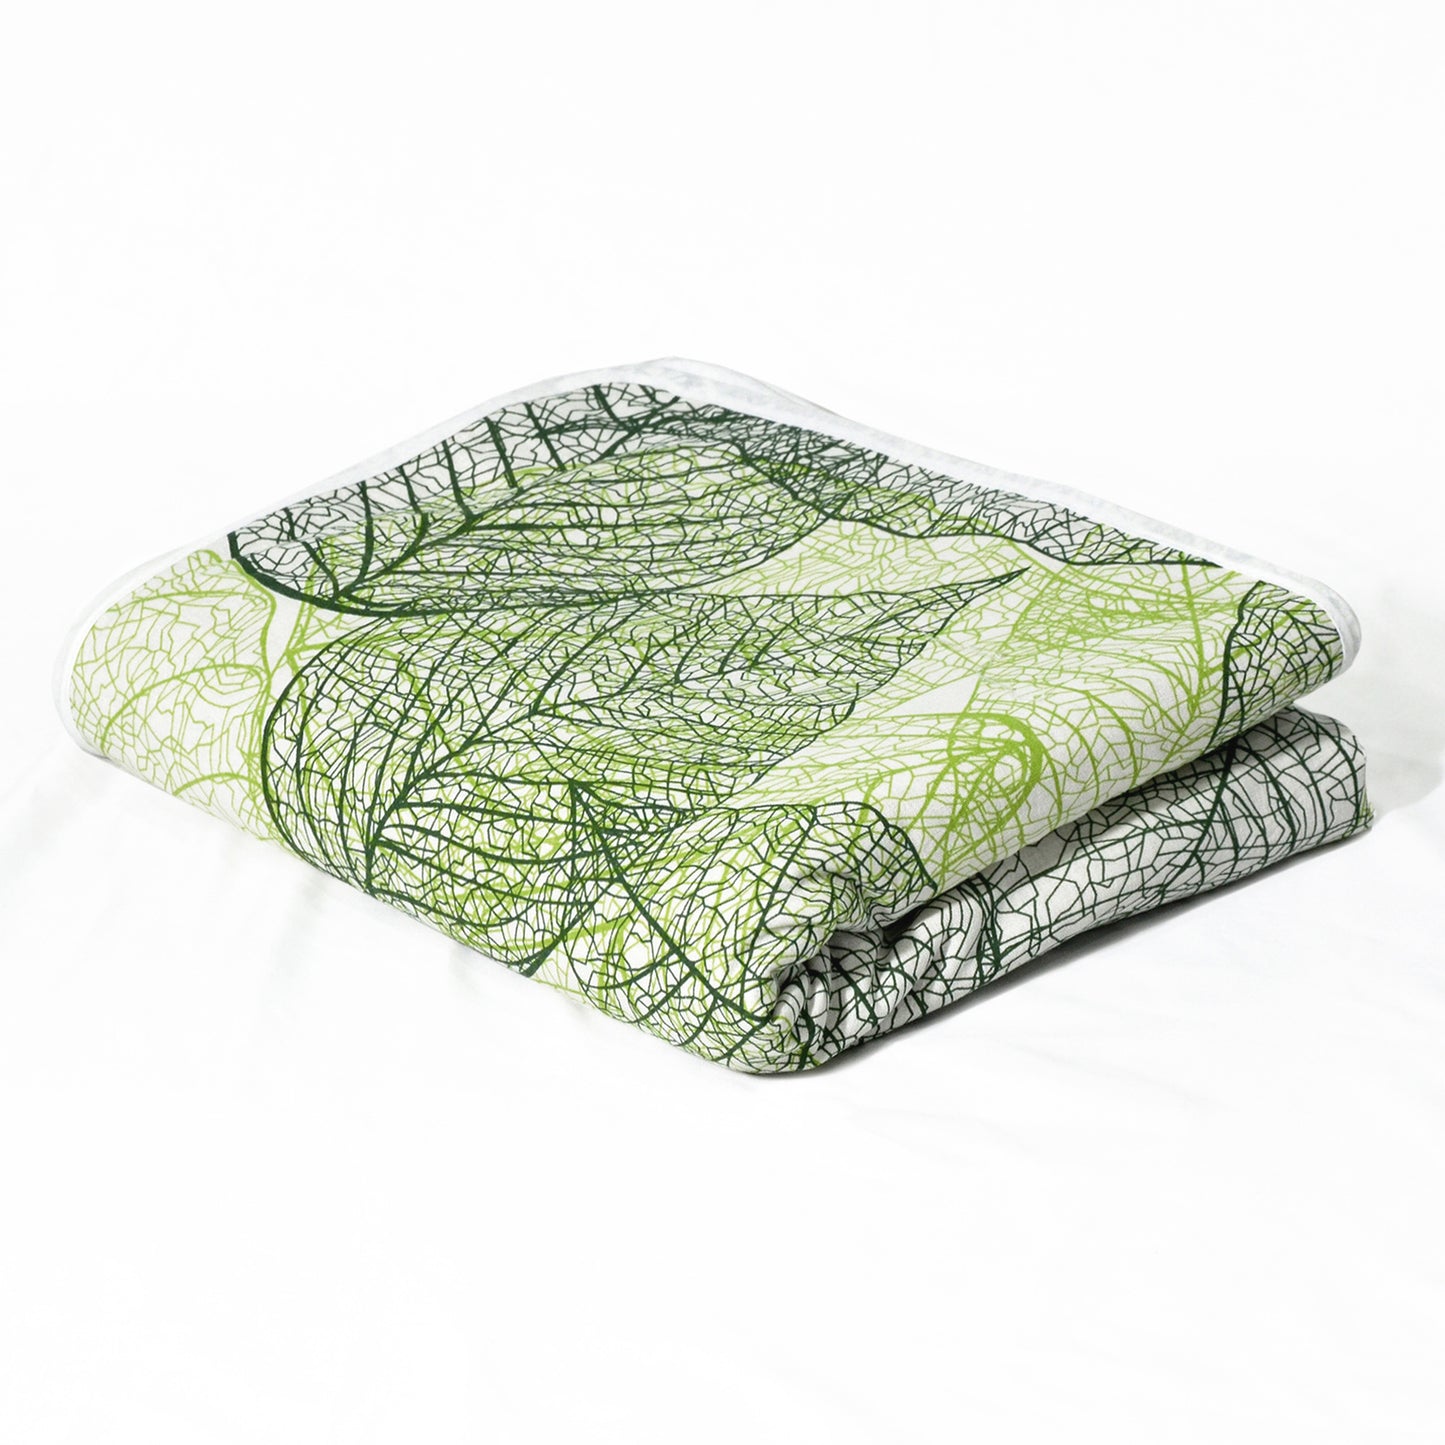 Green 120 GSM Cotton Floral Leaf Pattern Double Bed AC Blanket Dohar for All Season